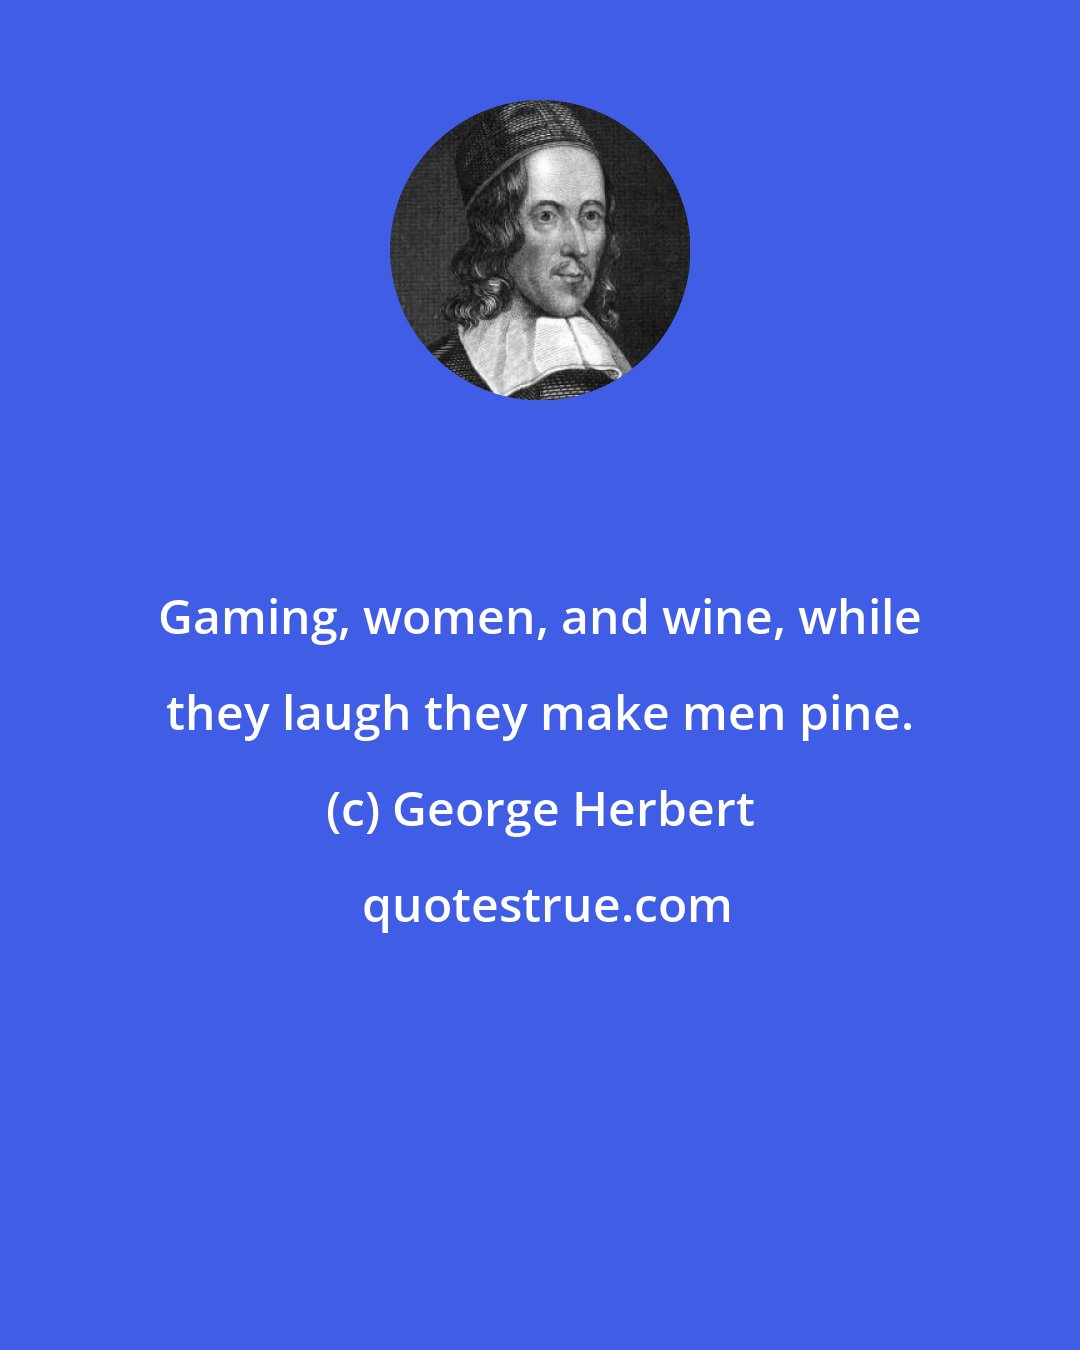 George Herbert: Gaming, women, and wine, while they laugh they make men pine.